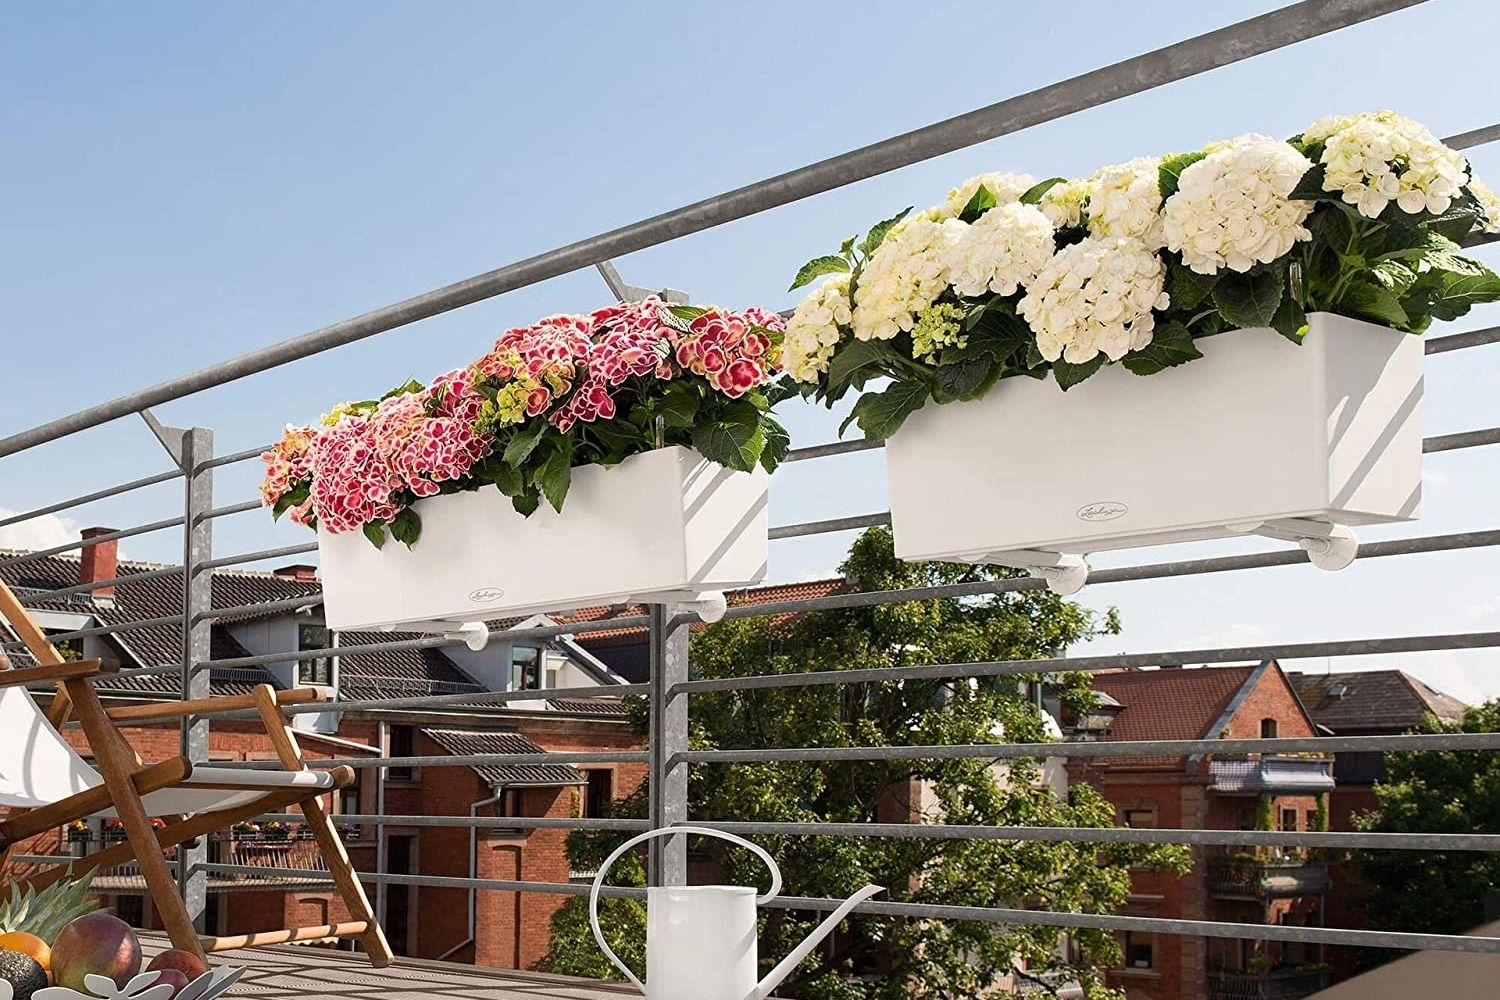 Balcony flowers - bright flowerboxes